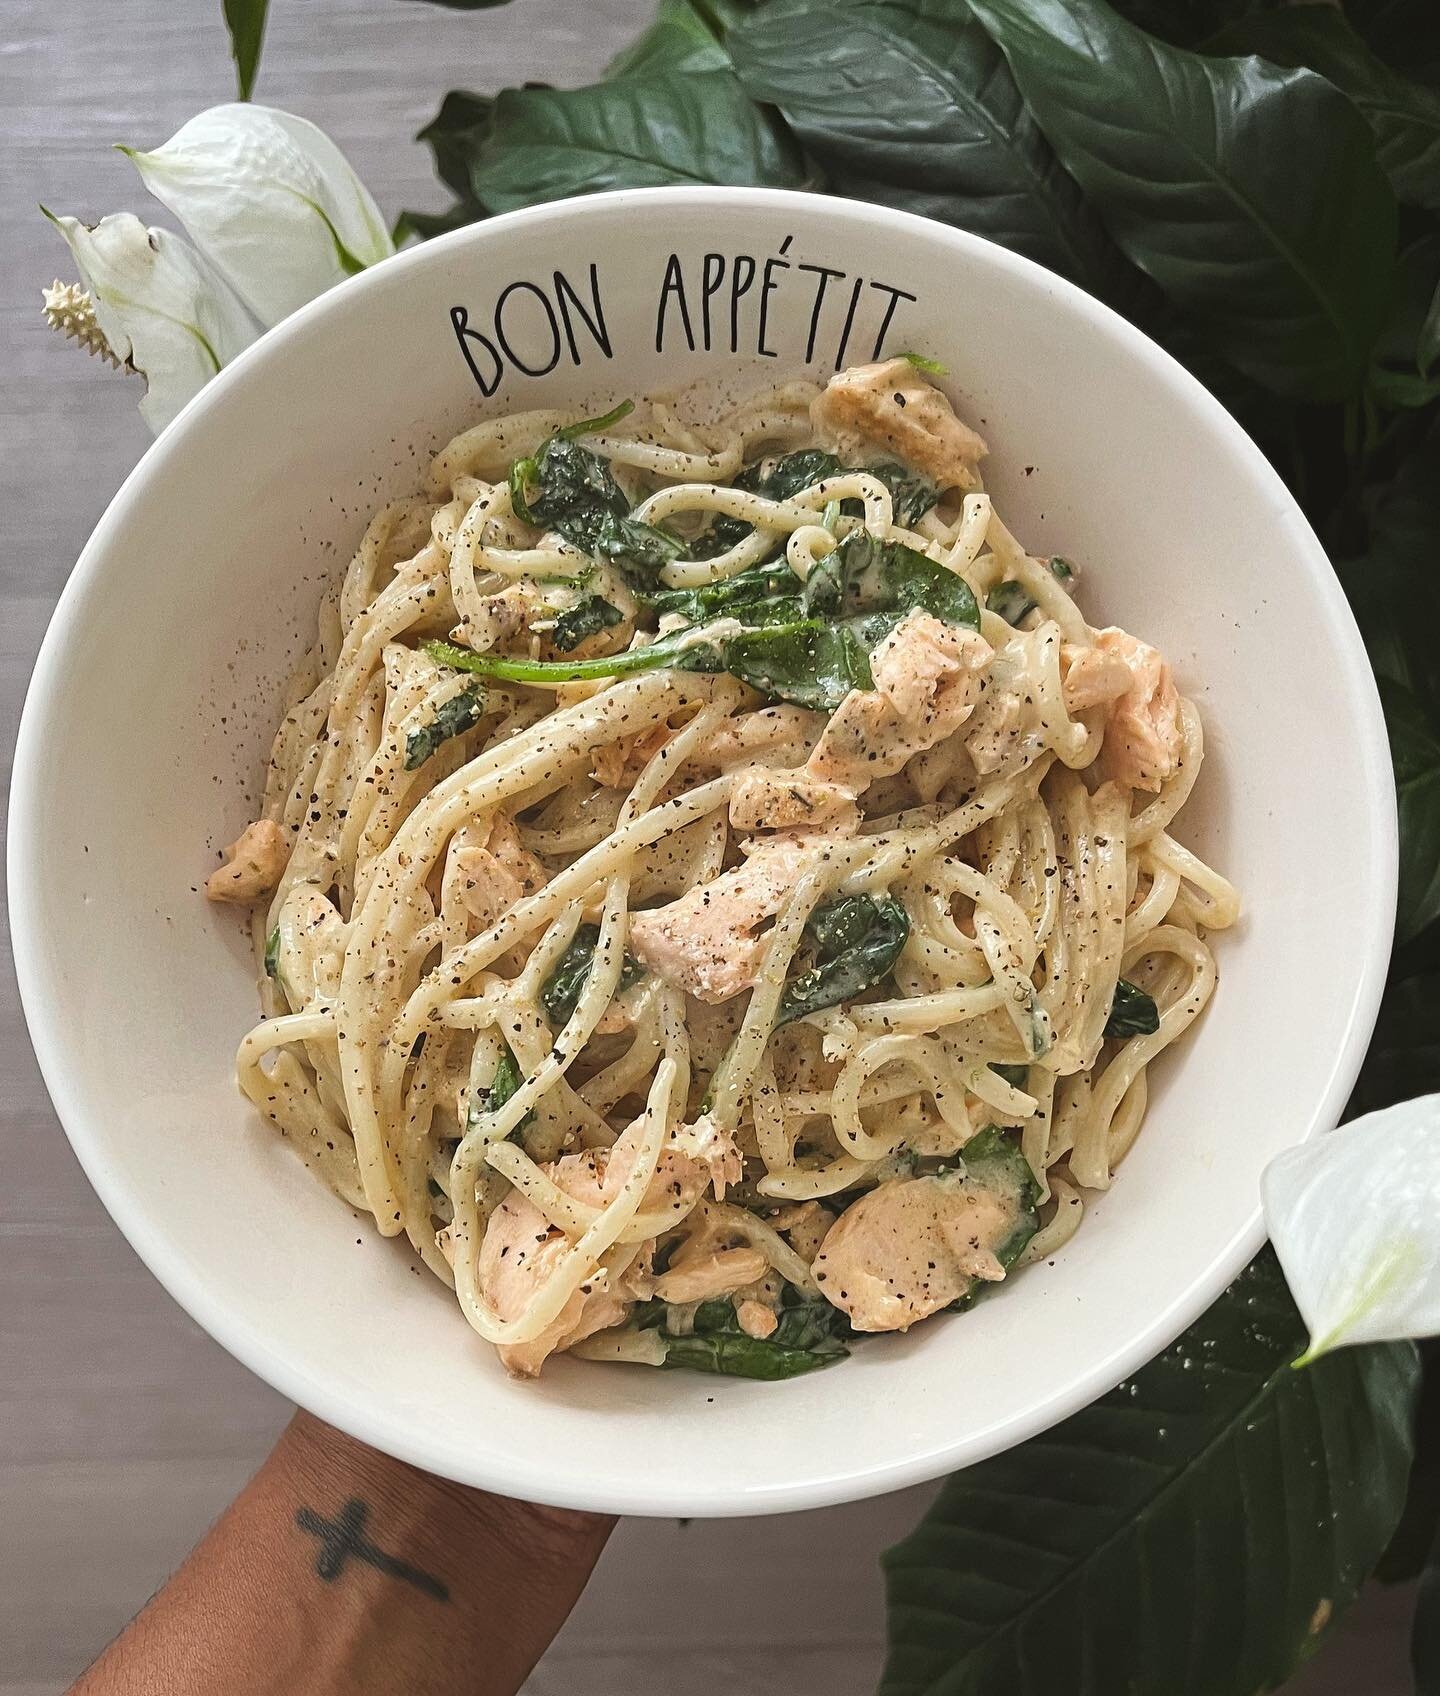 bucatini alfredo w/ blackened salmon + spinach

i rarely eat or make alfredo; i actually think this is the first time i&rsquo;ve posted a recipe. i wanted a quick meal but i wasn&rsquo;t in the mood to make a homemade sauce (yes, i know it&rsquo;s ea